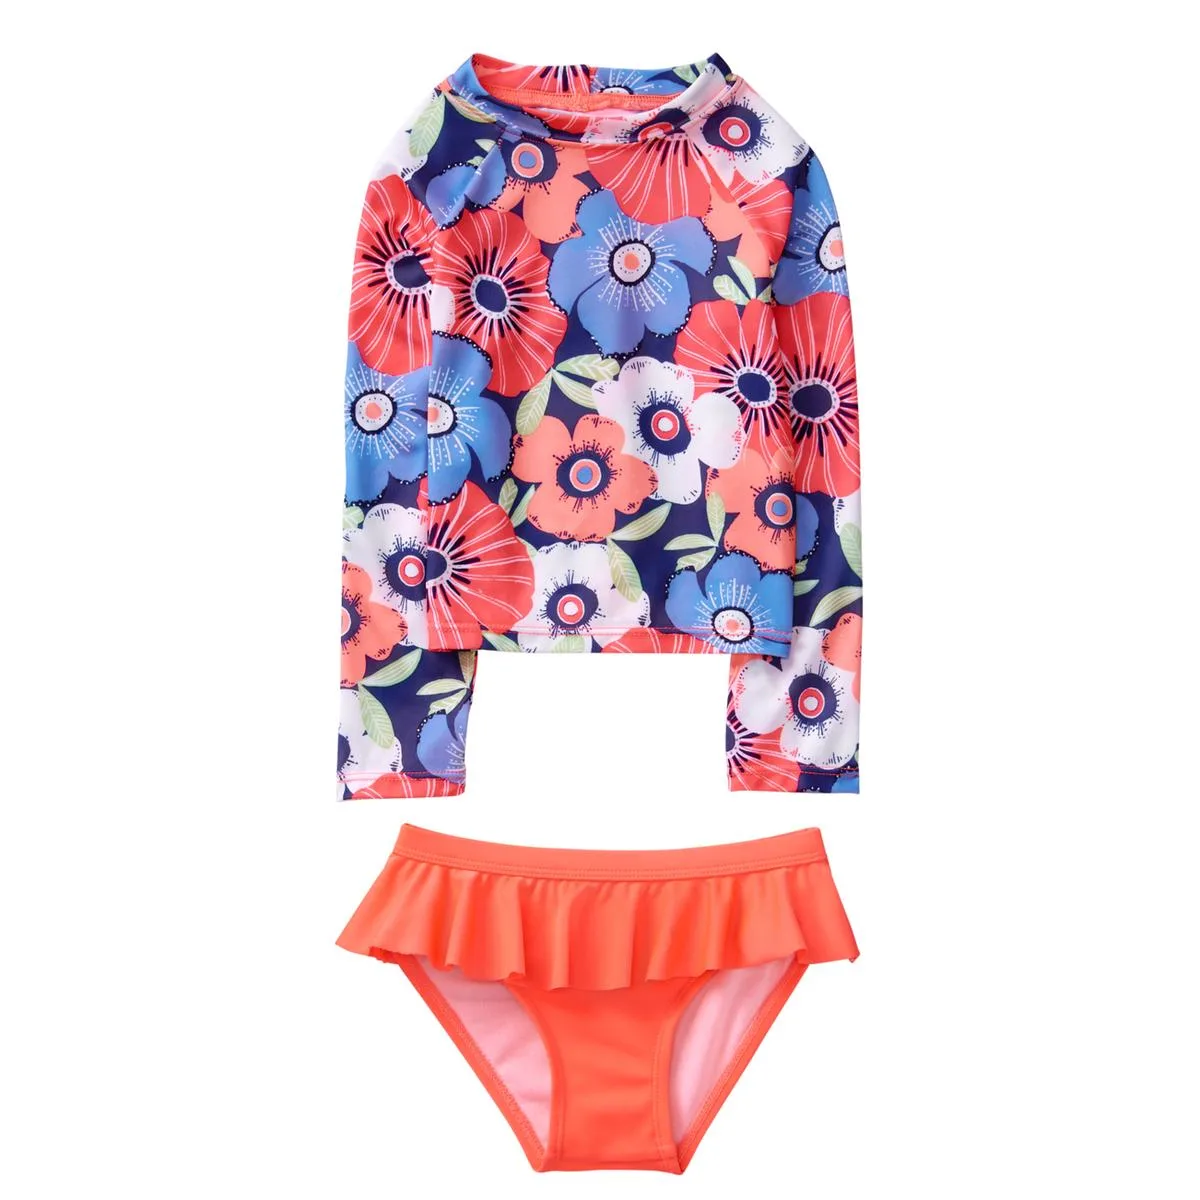 perri Most Adorable Toddler Girl Swimsuits These are the most adorable toddler girl swimsuits I have seen this season. If you're planning on taking your toddler to the beach then check out these tips for a happy vacation.  There are super cute girl bathing suits to fit any budget.  This post does contain affiliate links, any purchase you make doesn't cost you anything and helps support this site.